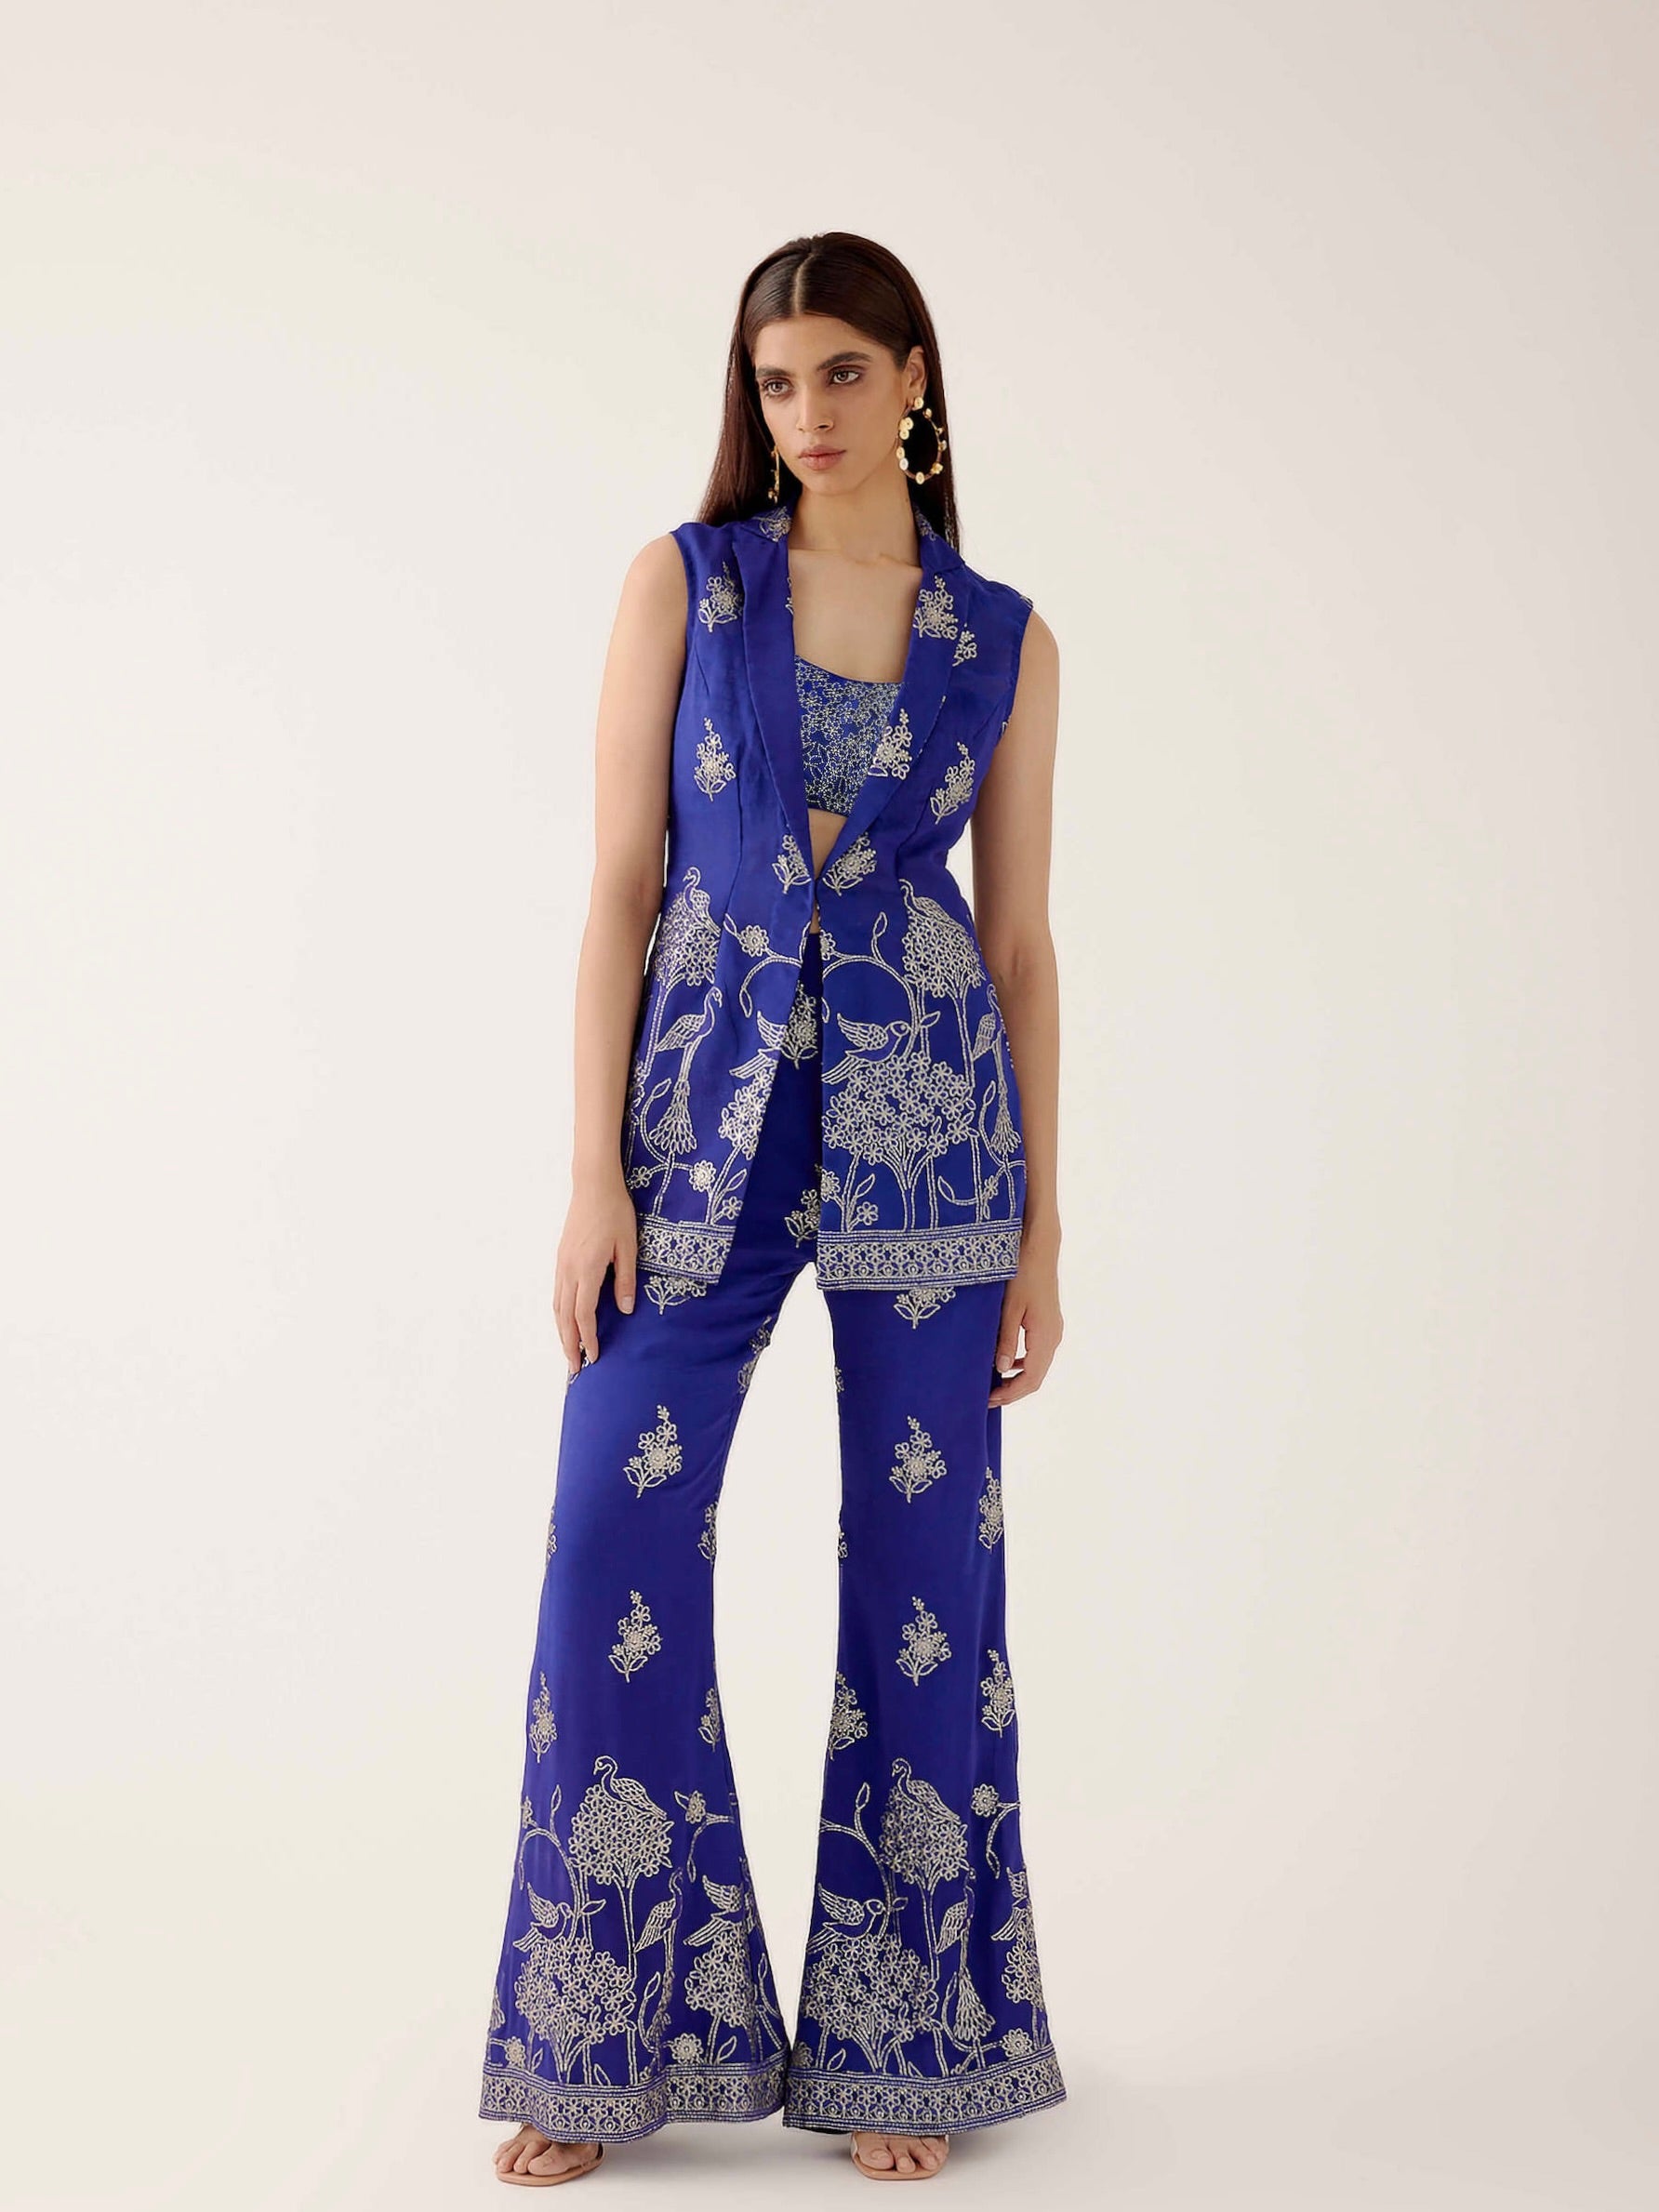 The embroidered Manali Set consists of a blue vest, bra top, and flared pants.